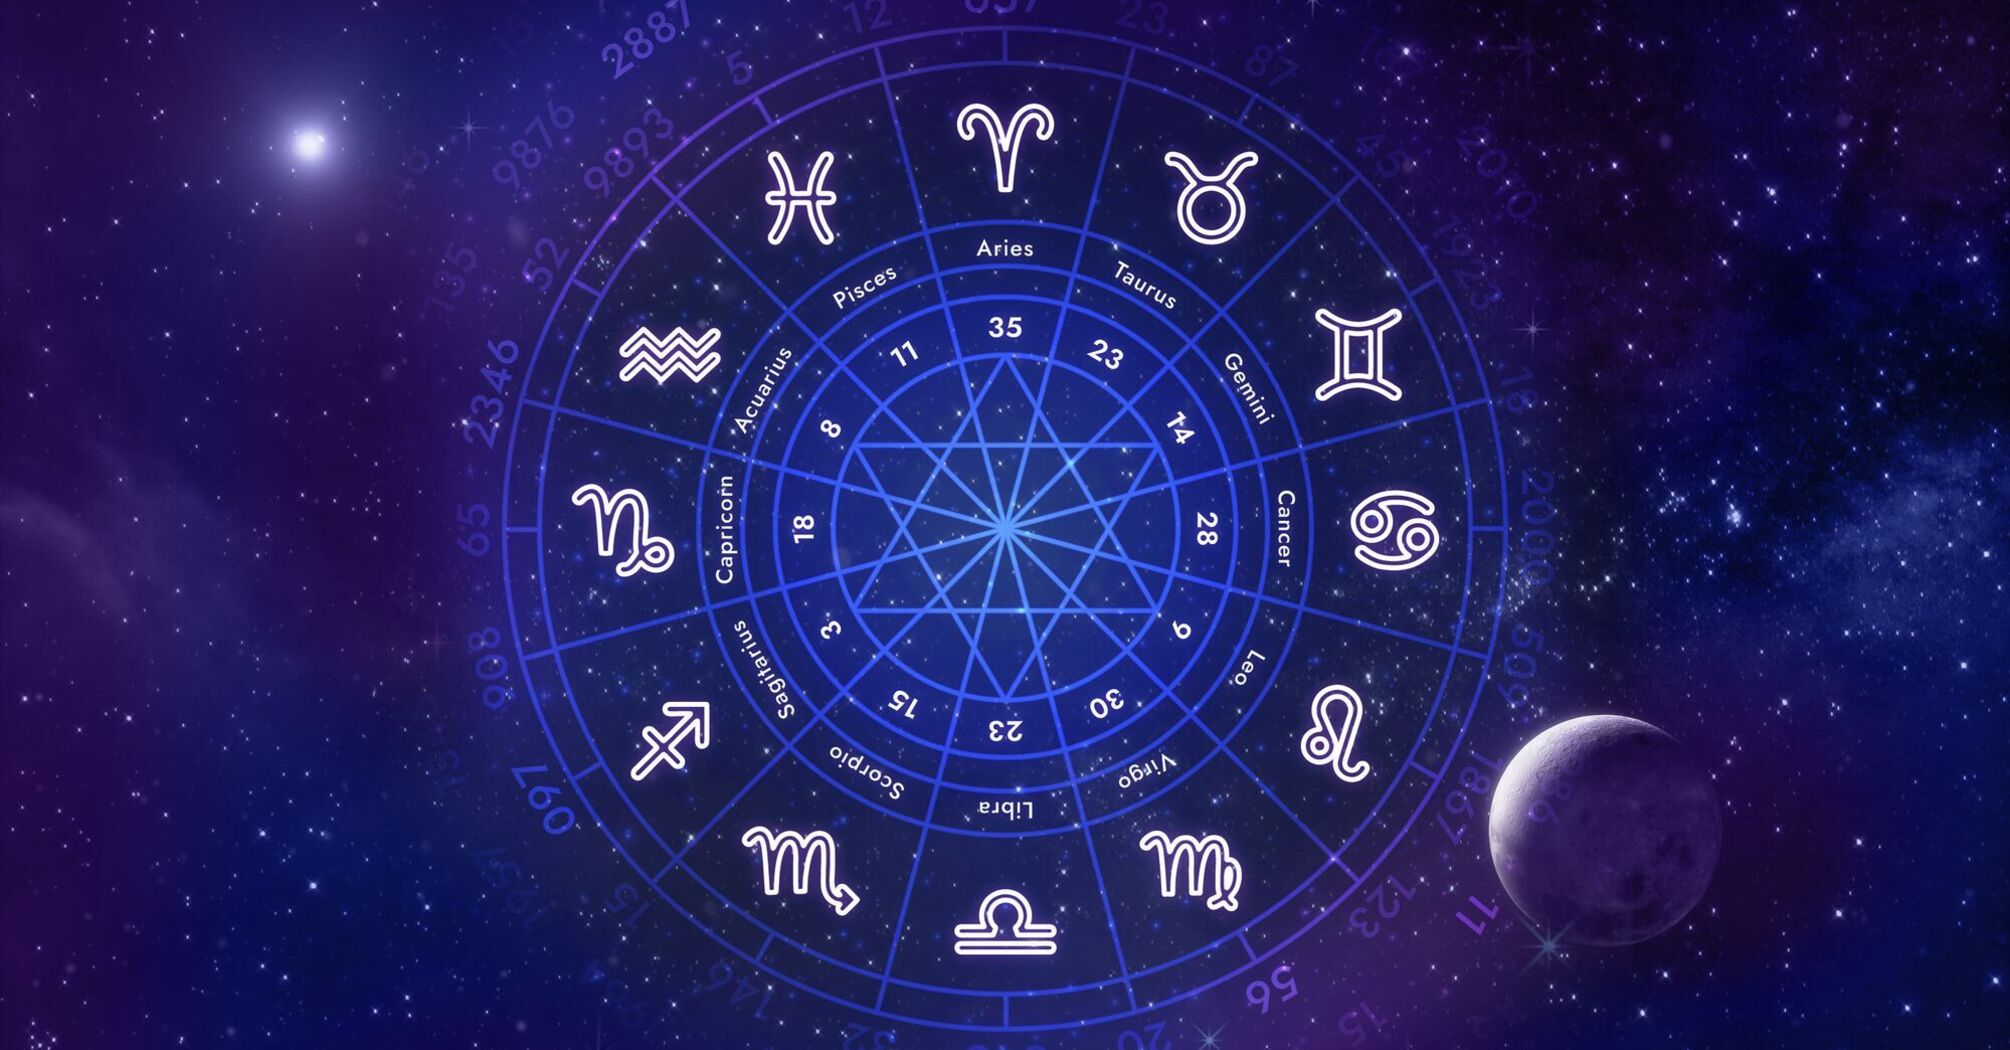 Unique opportunities and unforeseen challenges are expected: Horoscope for February 21